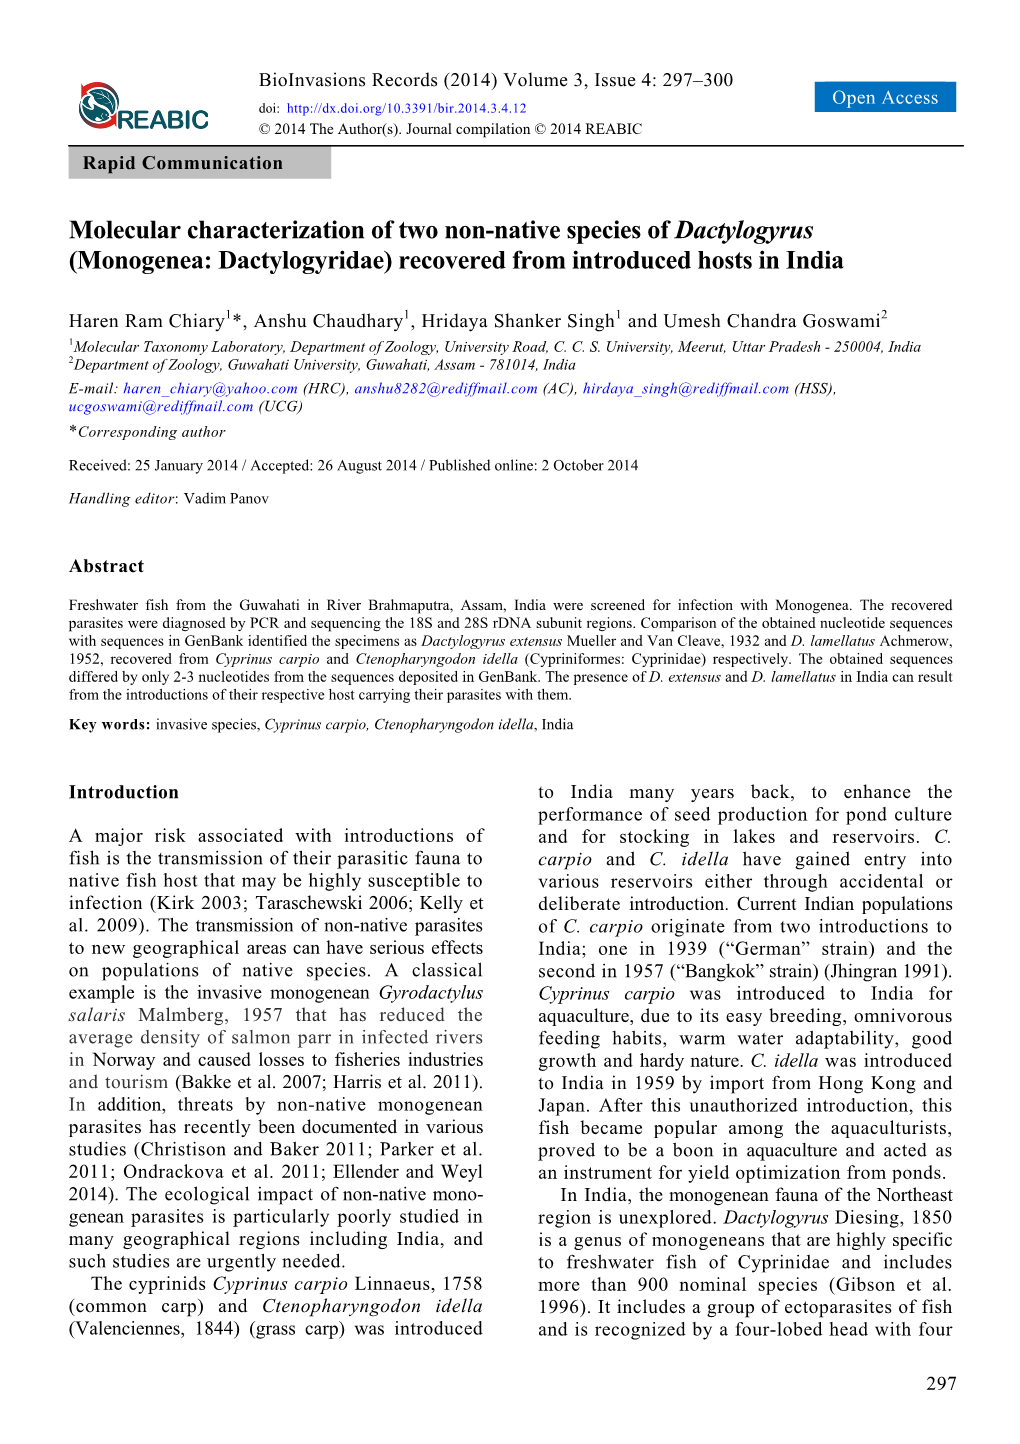 Molecular Characterization of Two Non-Native Species of Dactylogyrus (Monogenea: Dactylogyridae) Recovered from Introduced Hosts in India